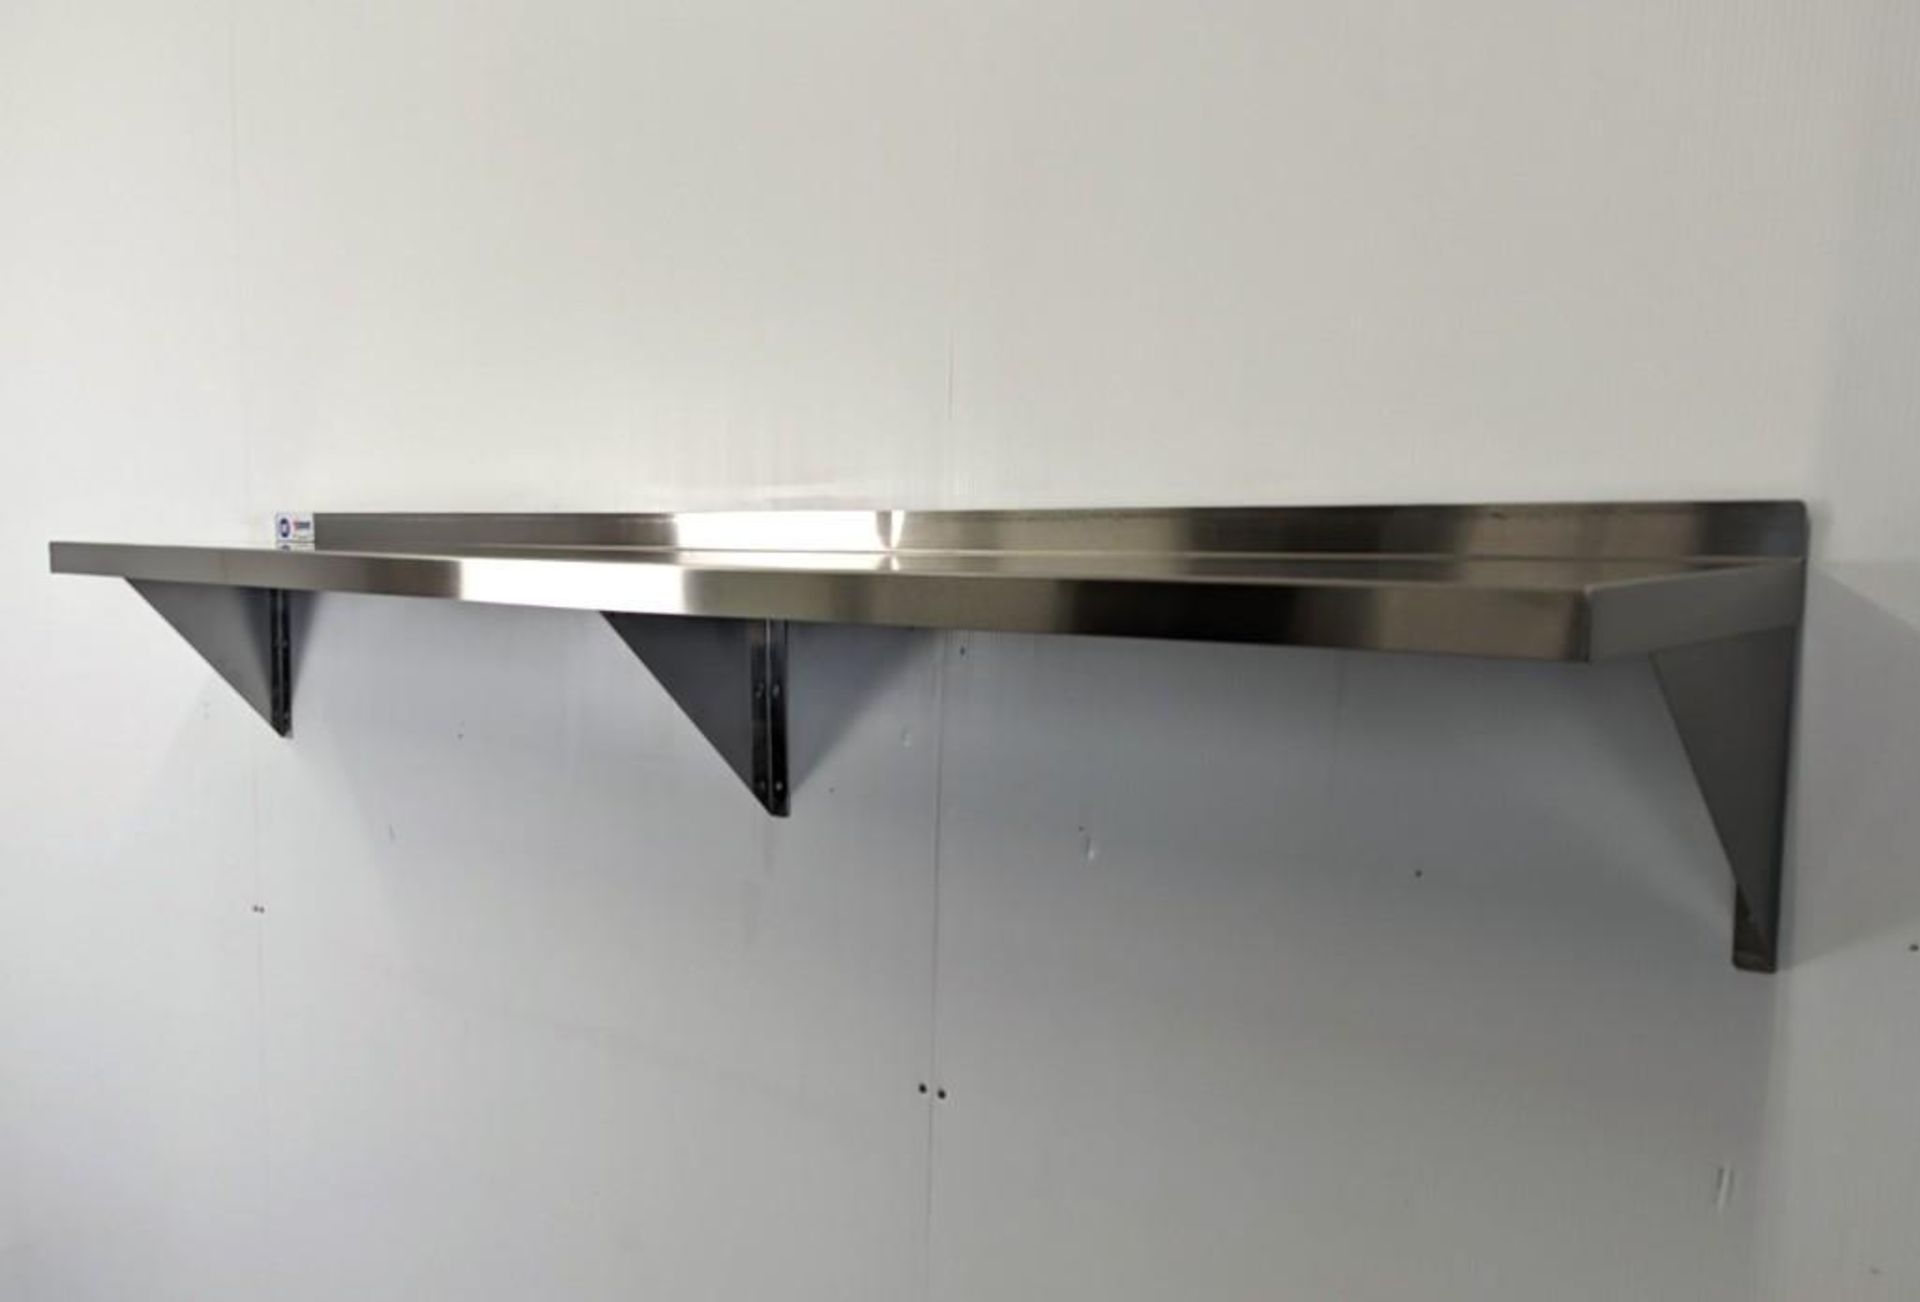 72" X 12" STAINLESS STEEL WALL SHELF - OMCAN 30455 - NEW - Image 3 of 4